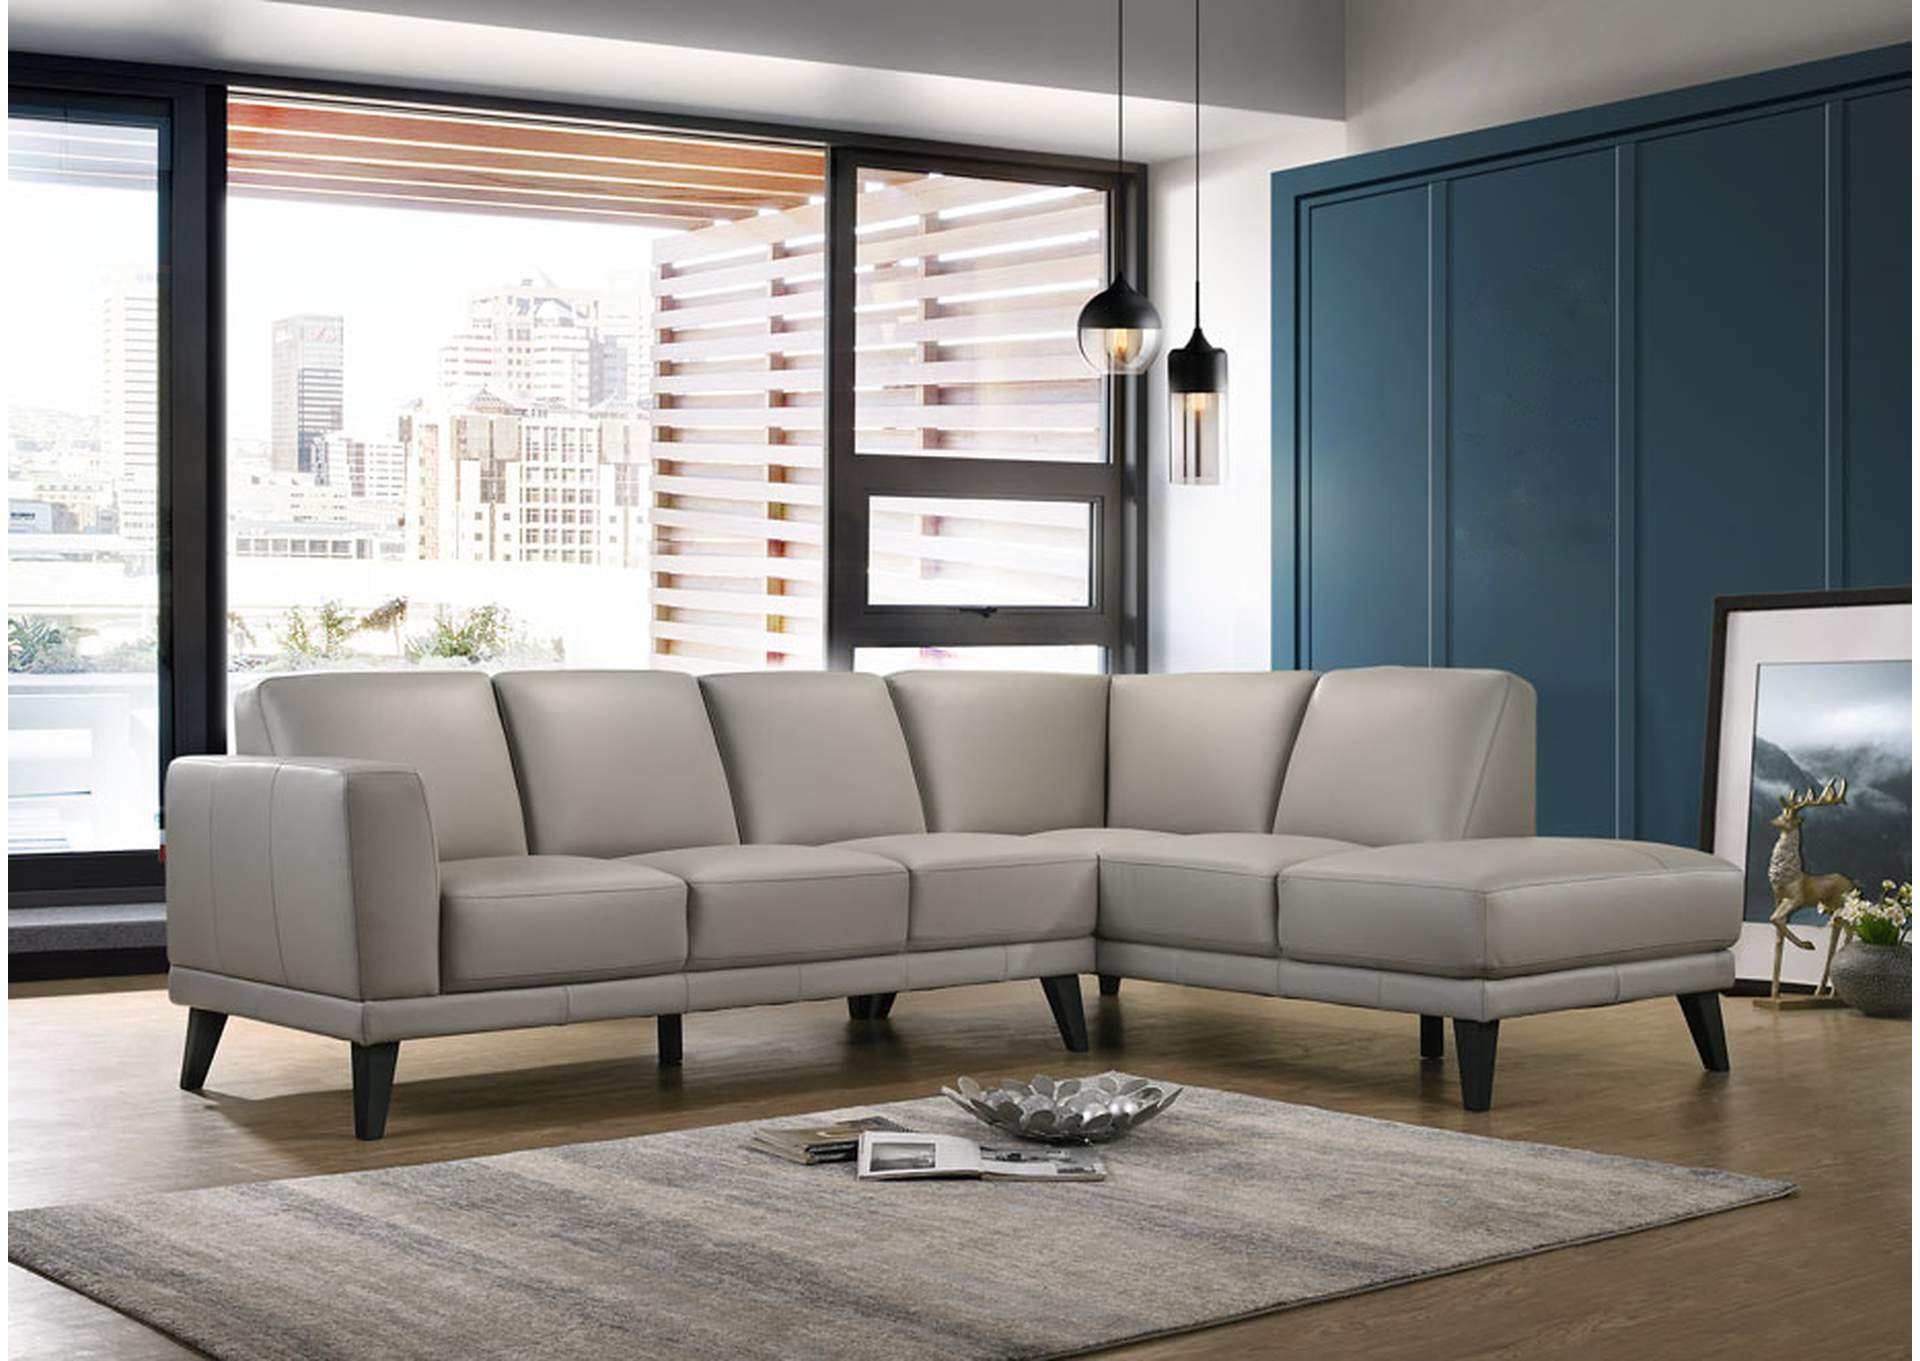 Altanura Mist Laf Sectional,New Classic